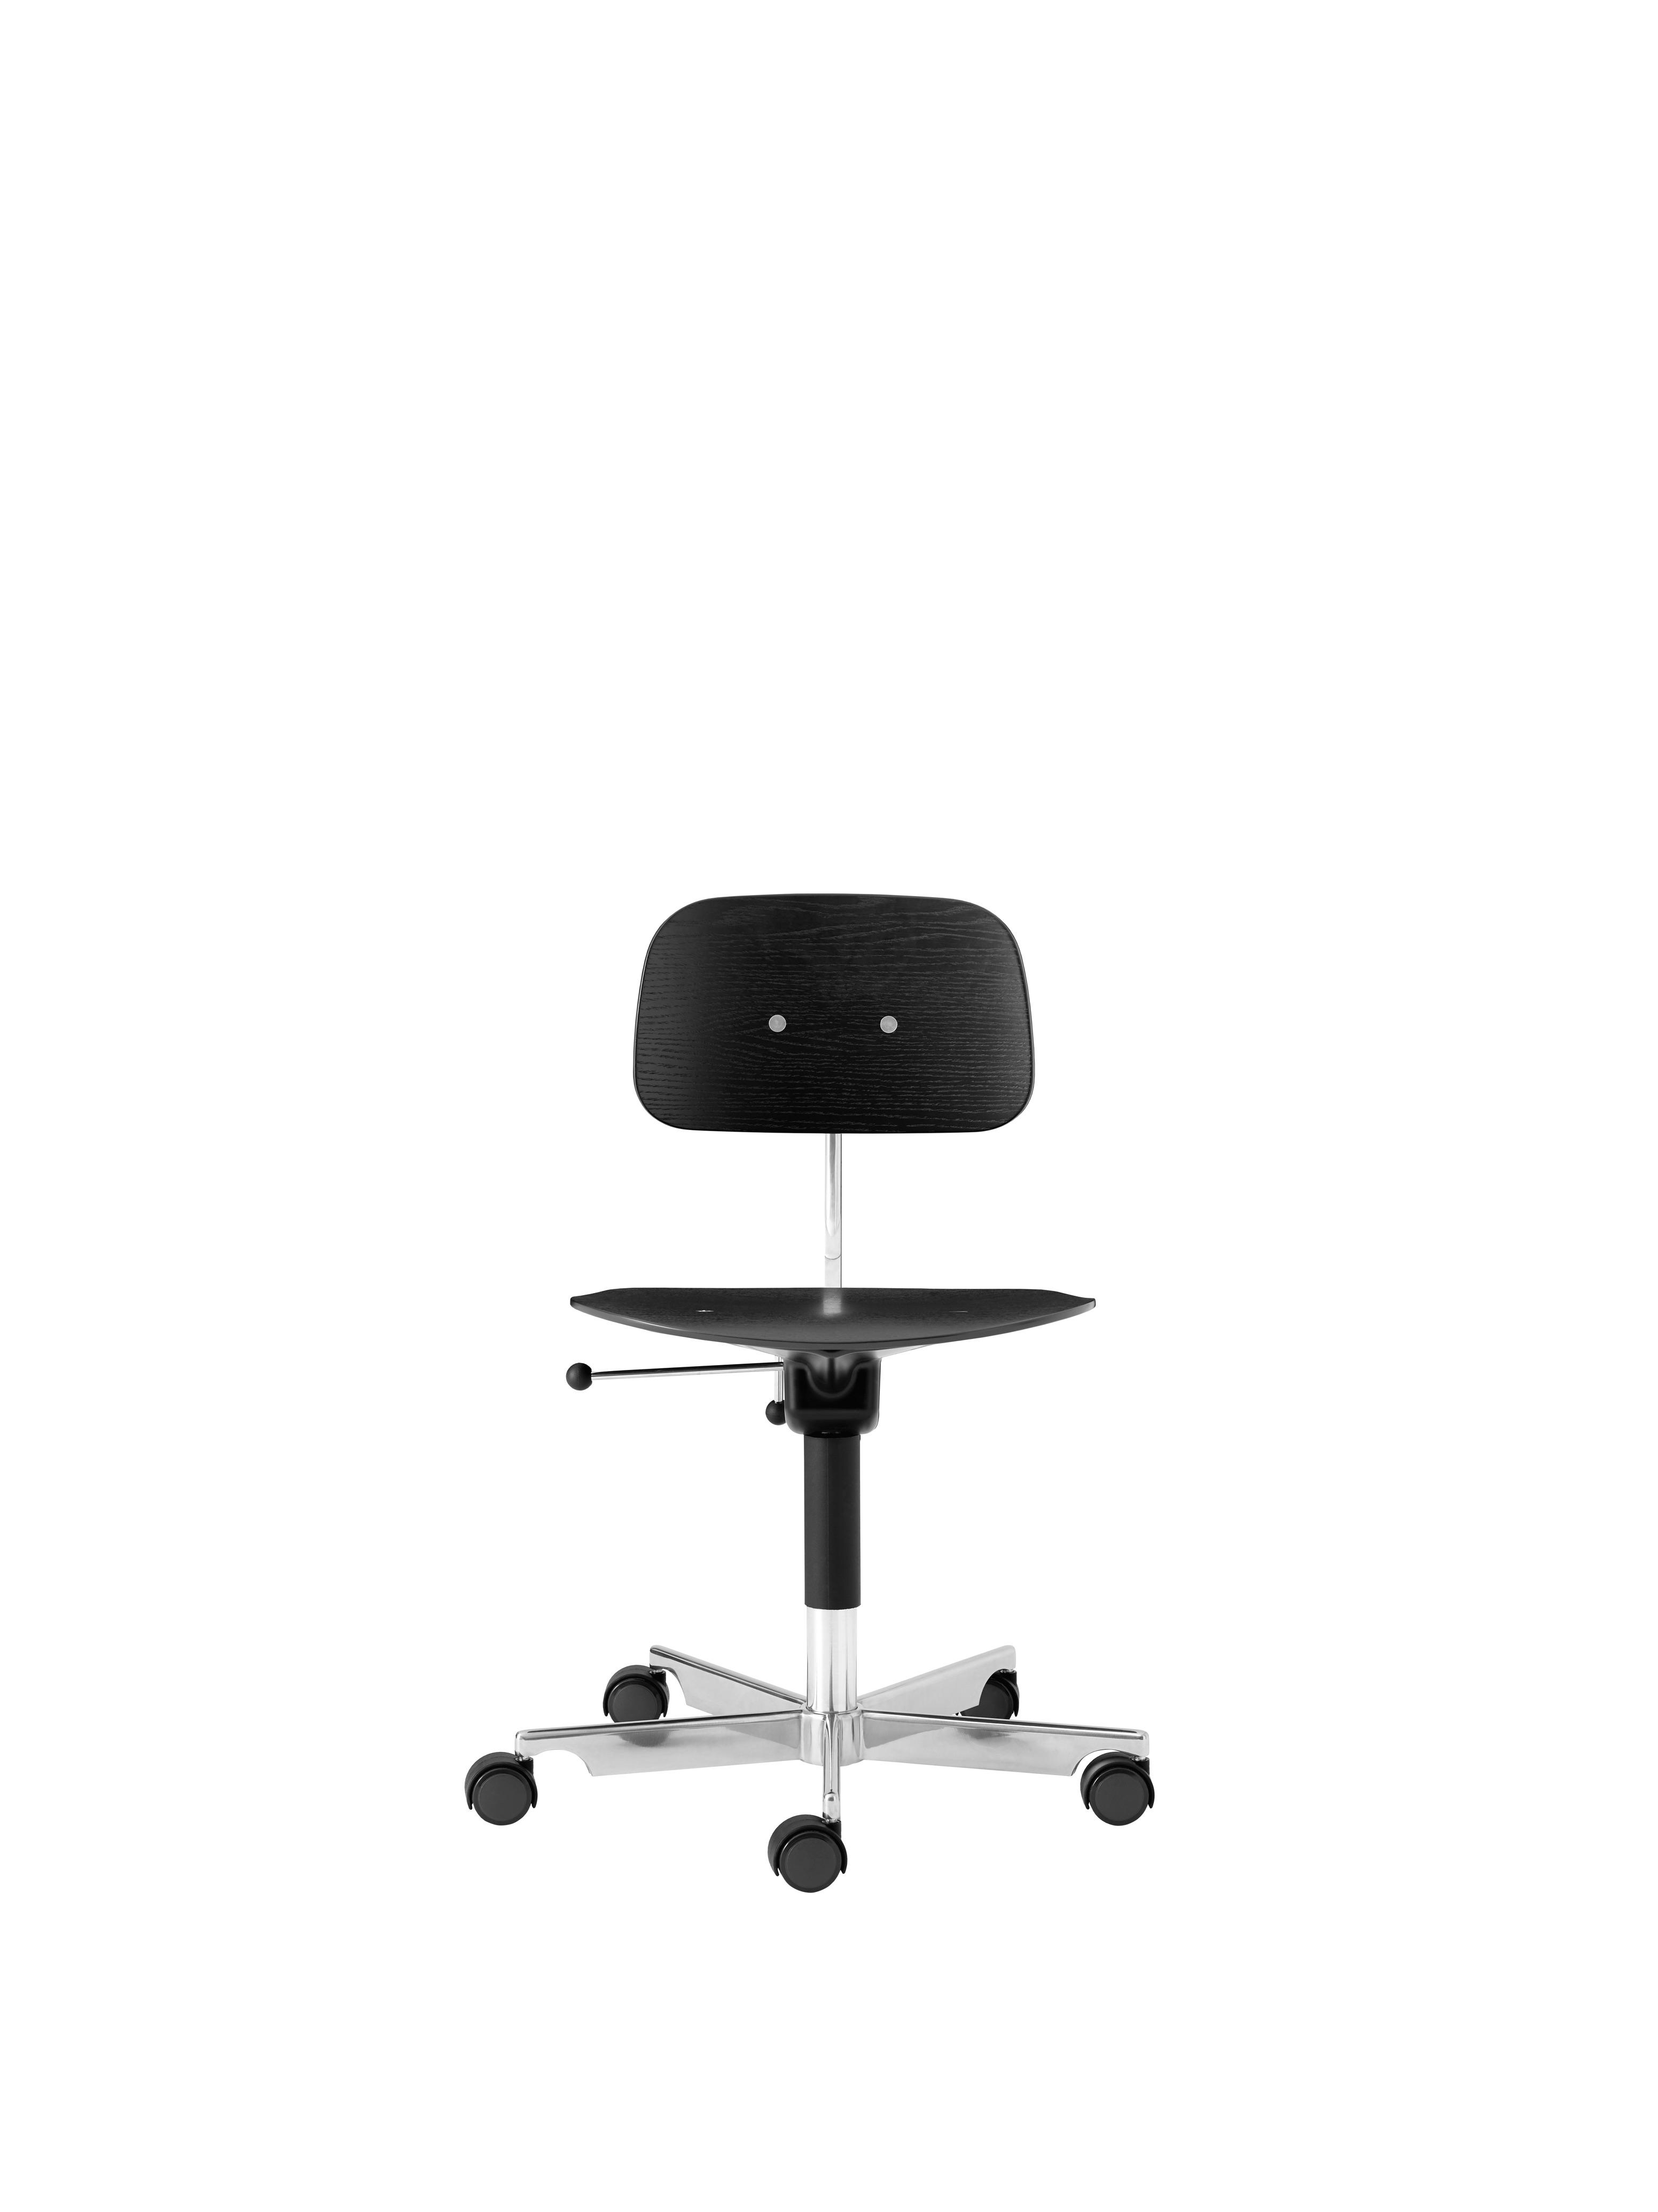 KEVI chairs and tables for home or office - Image bank - Engelbrechts